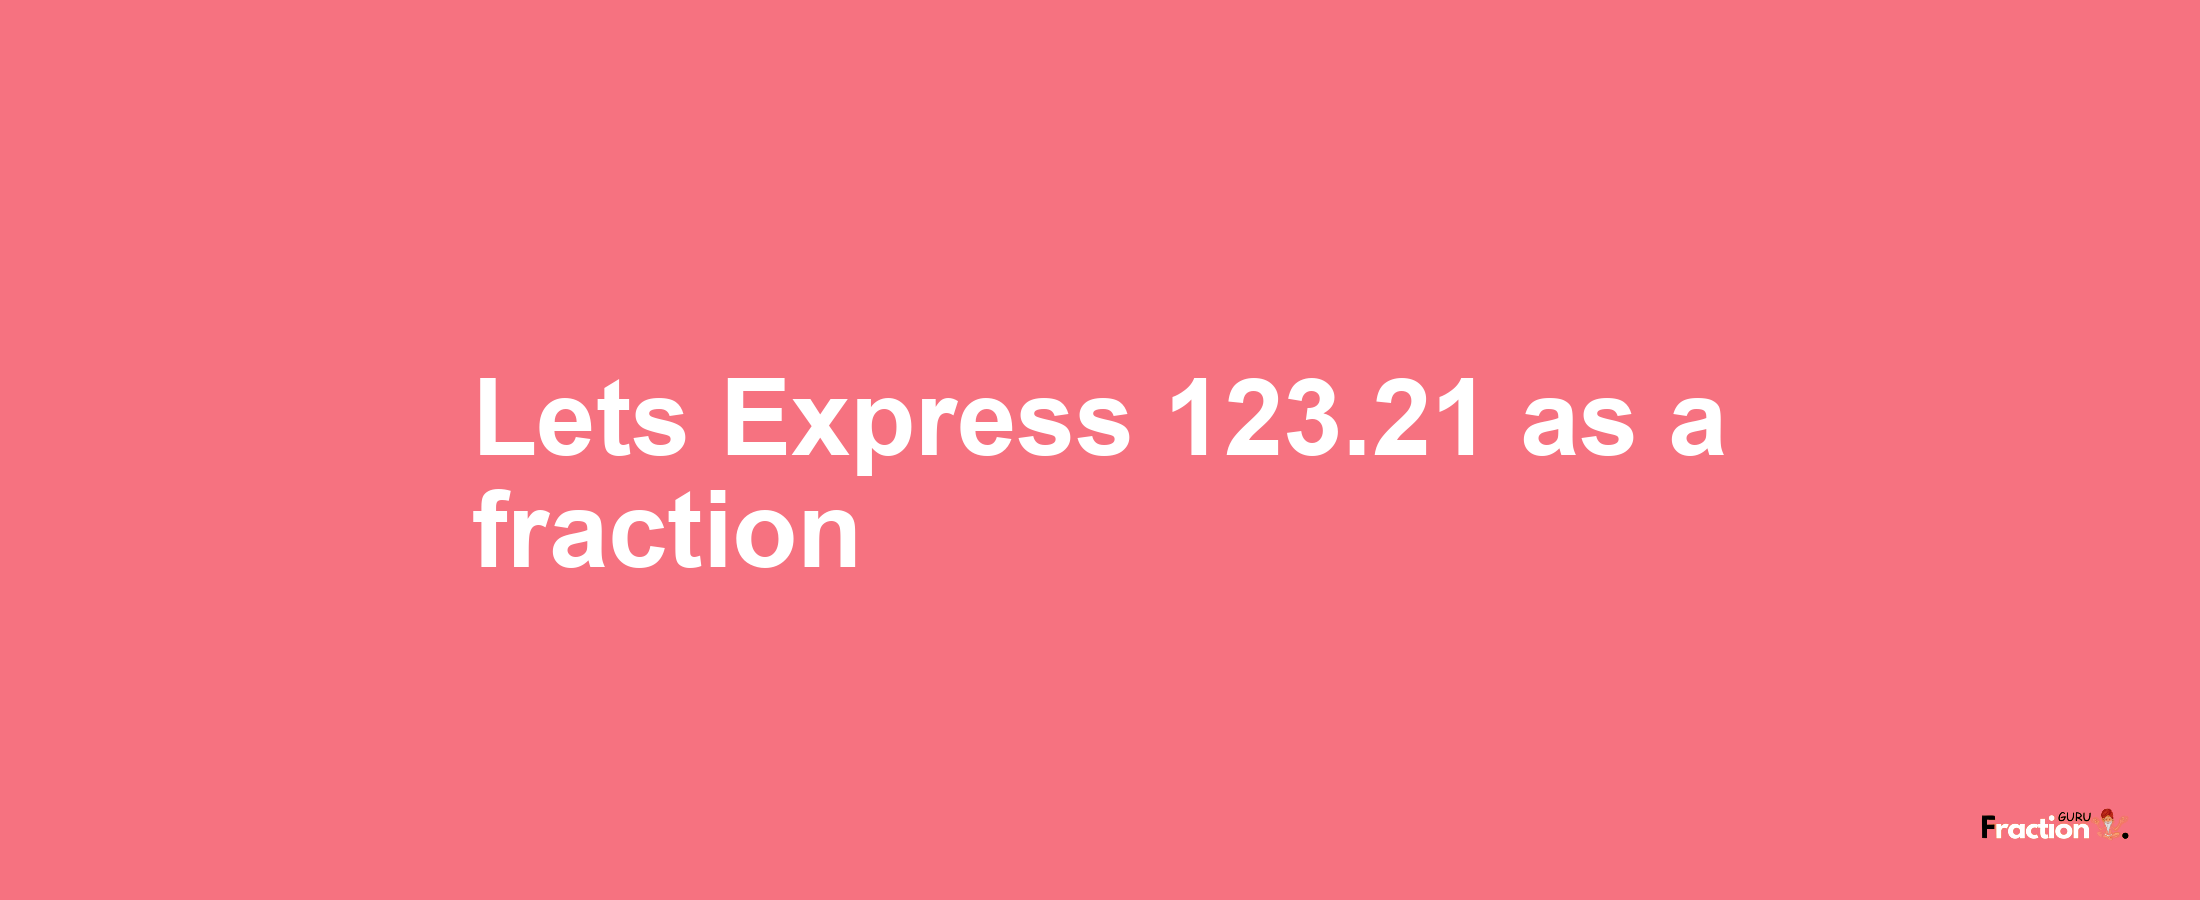 Lets Express 123.21 as afraction